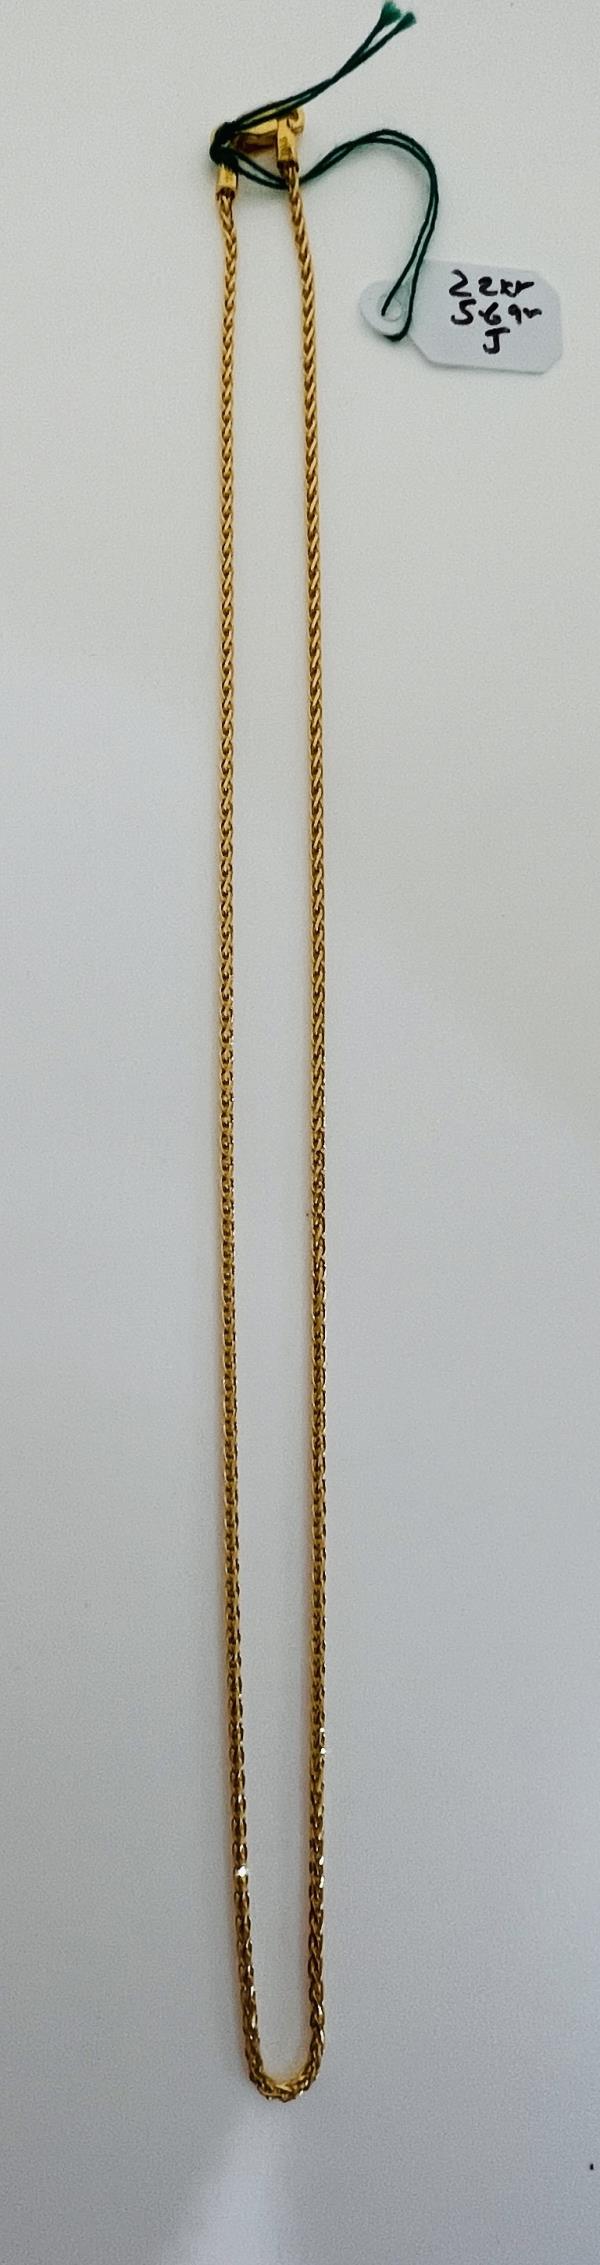 22KT GOLD CHAIN 14" 5.6GM